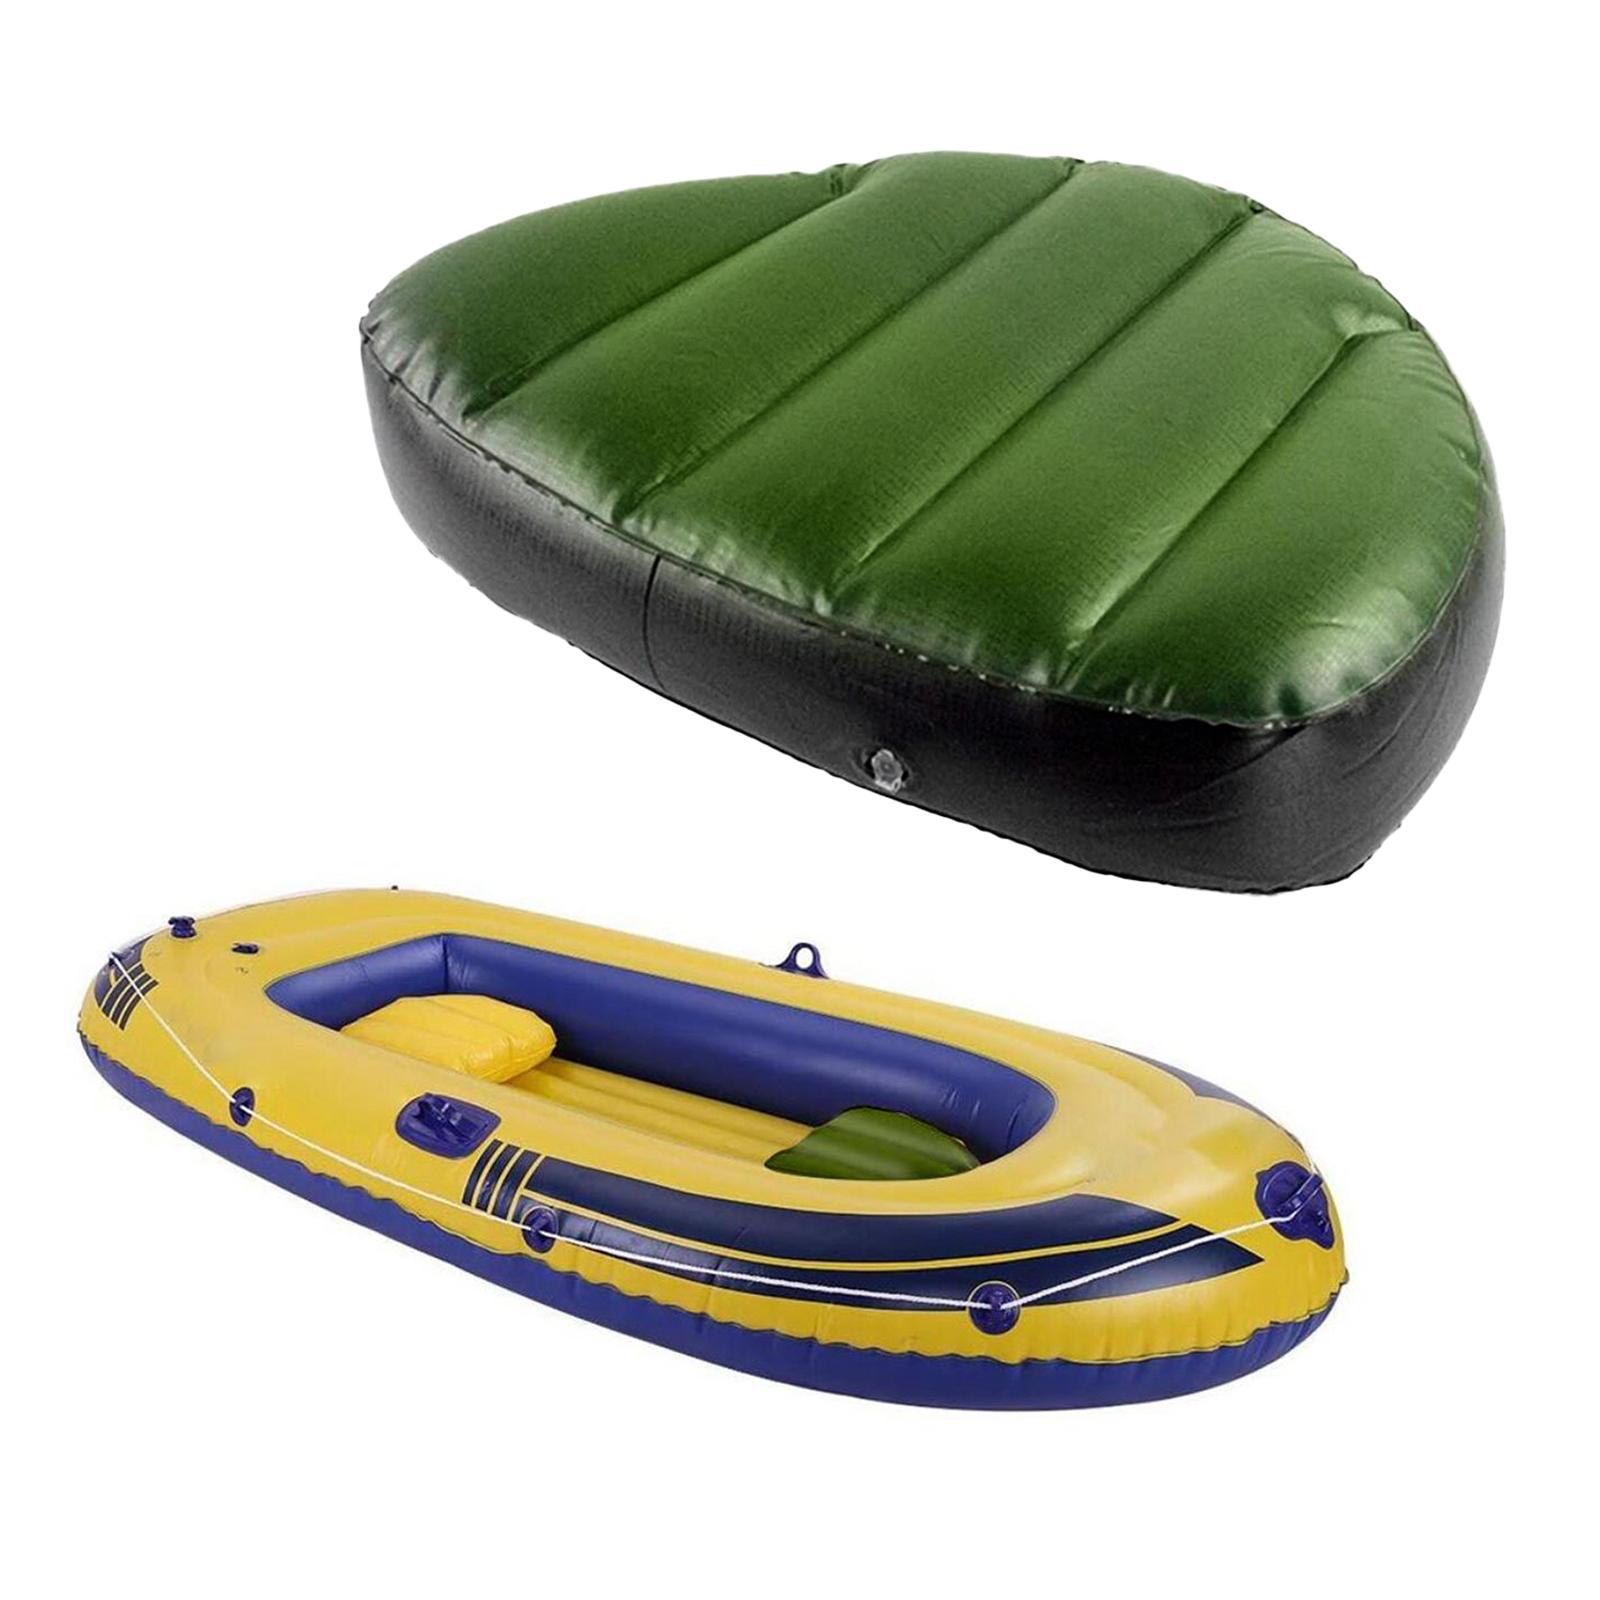 Inflatable Seat Cushion Boat Air Seat Pad For Fishing Camping Black+Green